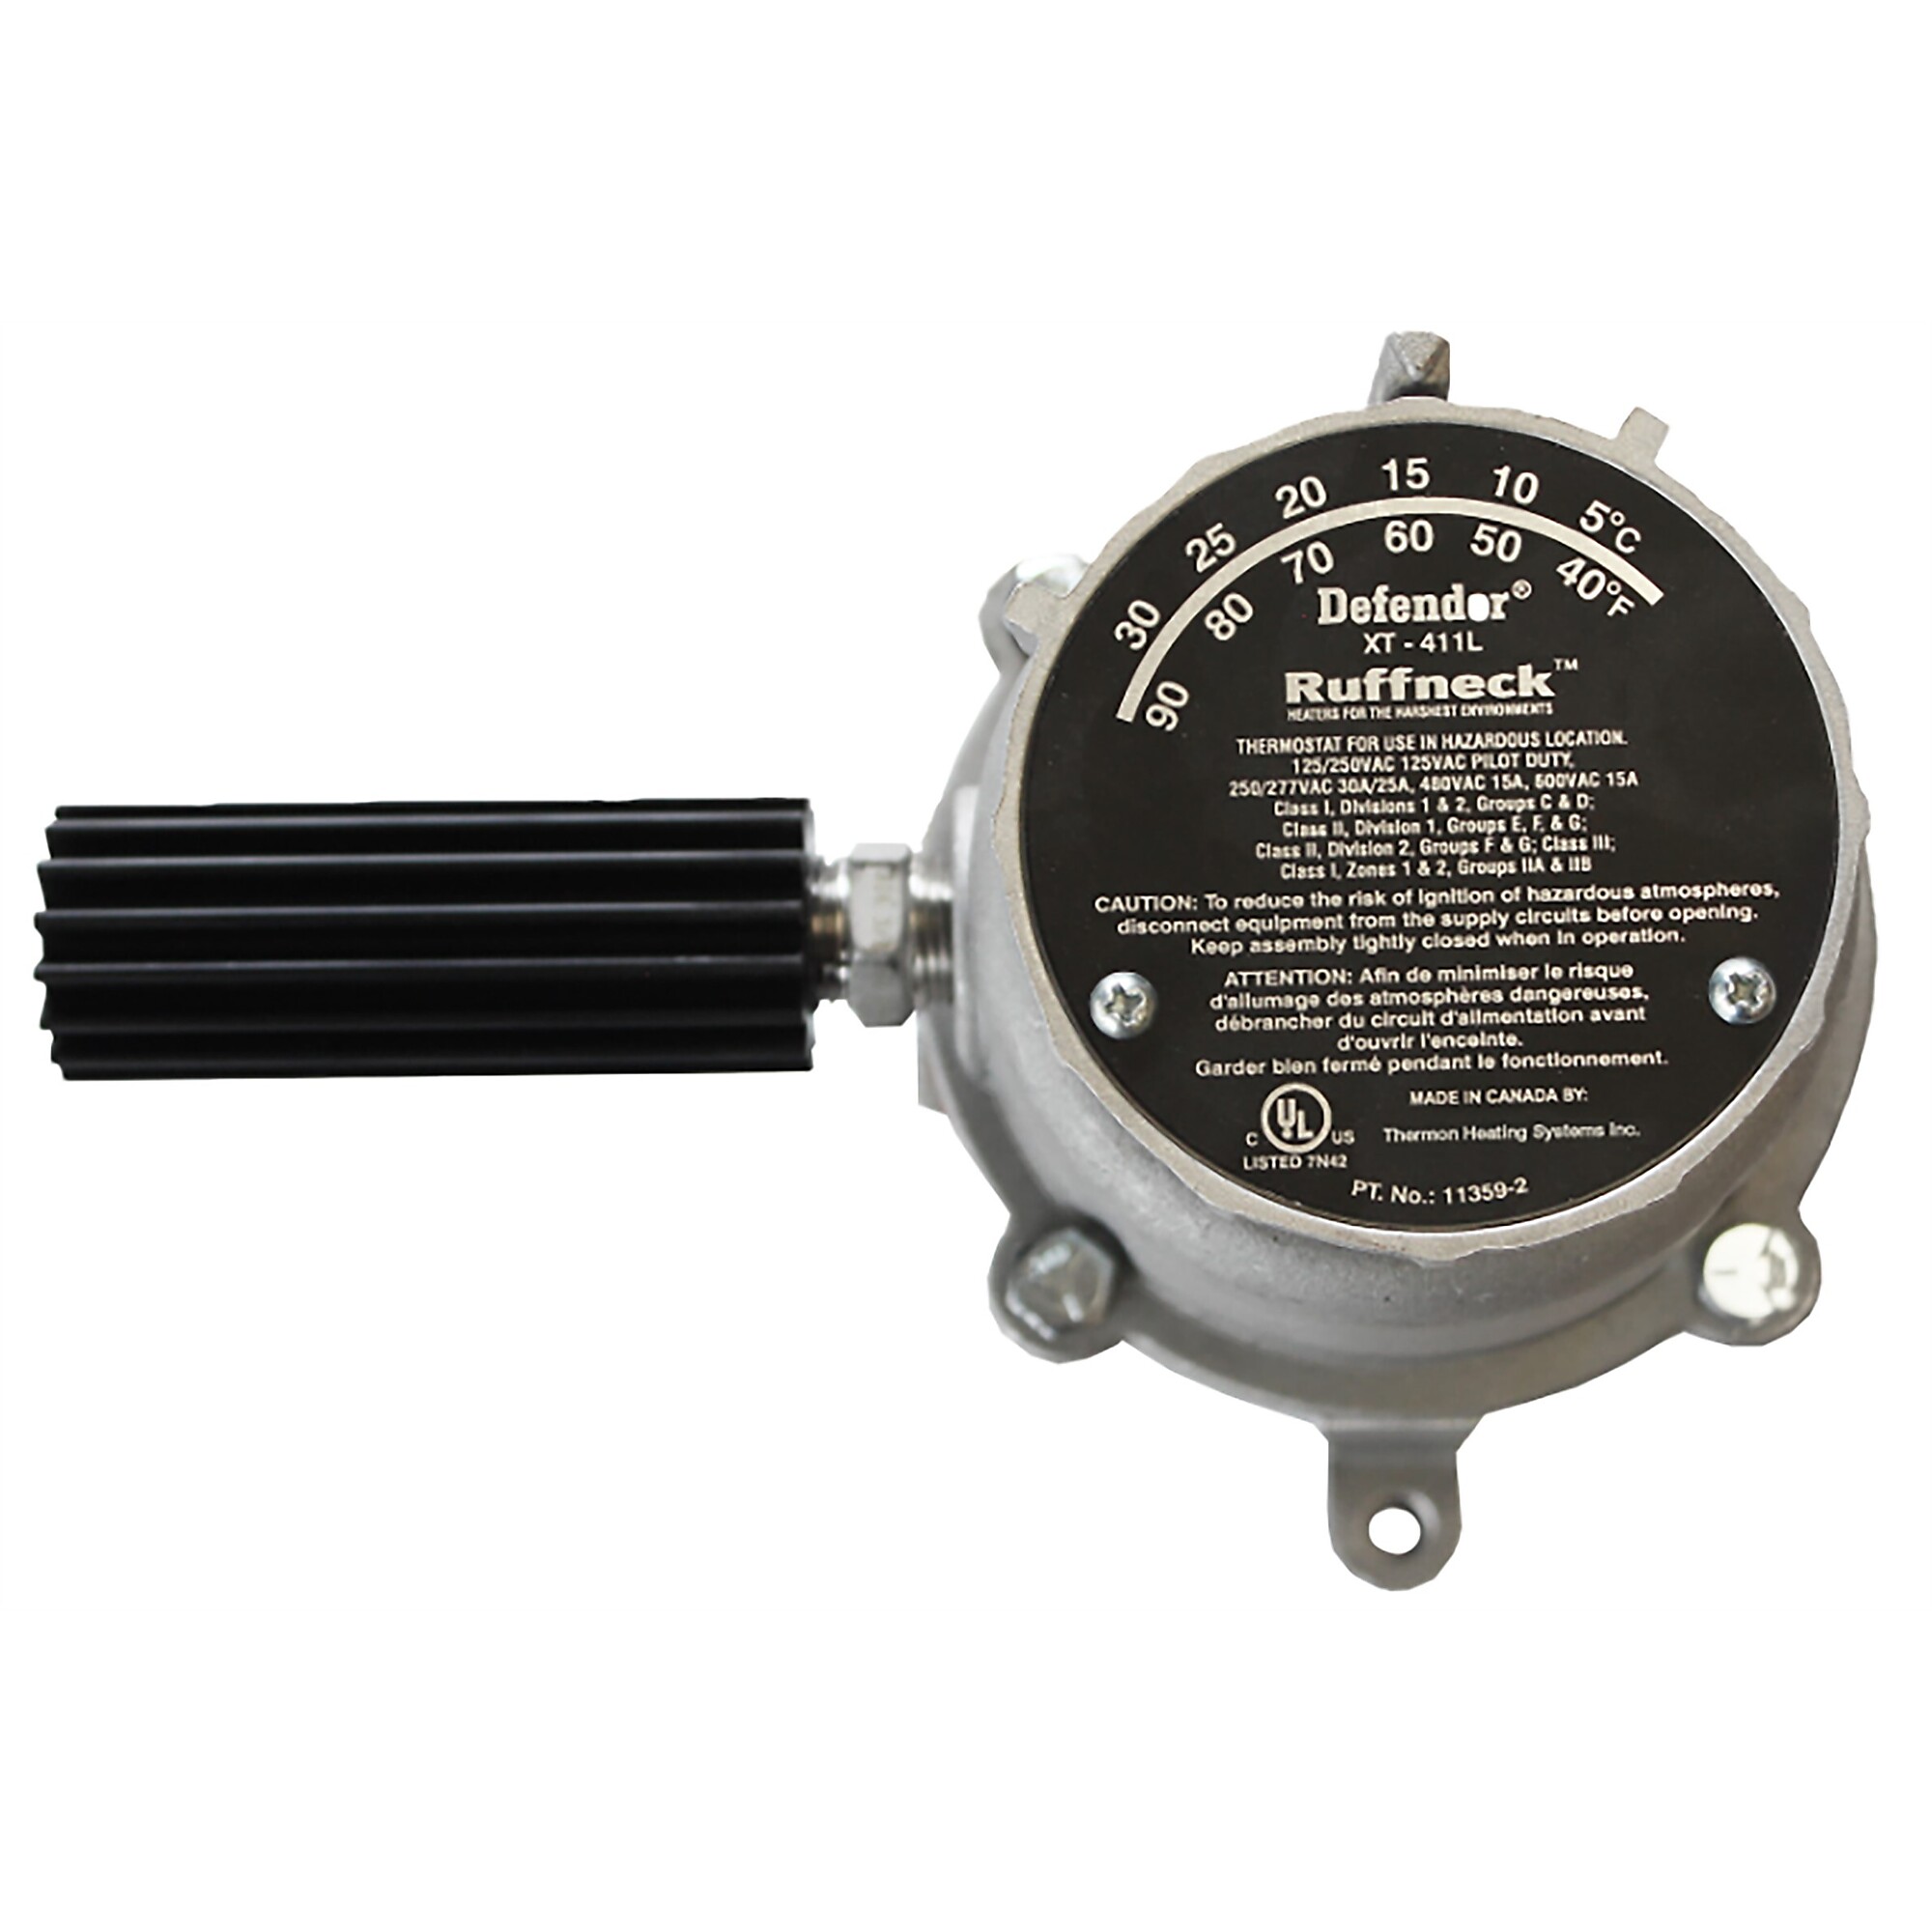 Ruffneck Defender Explosion-Proof Thermostat Compatible w/ Ruffneck Explosion-Proof FX Series Forced Air Heater, Model XT-411L